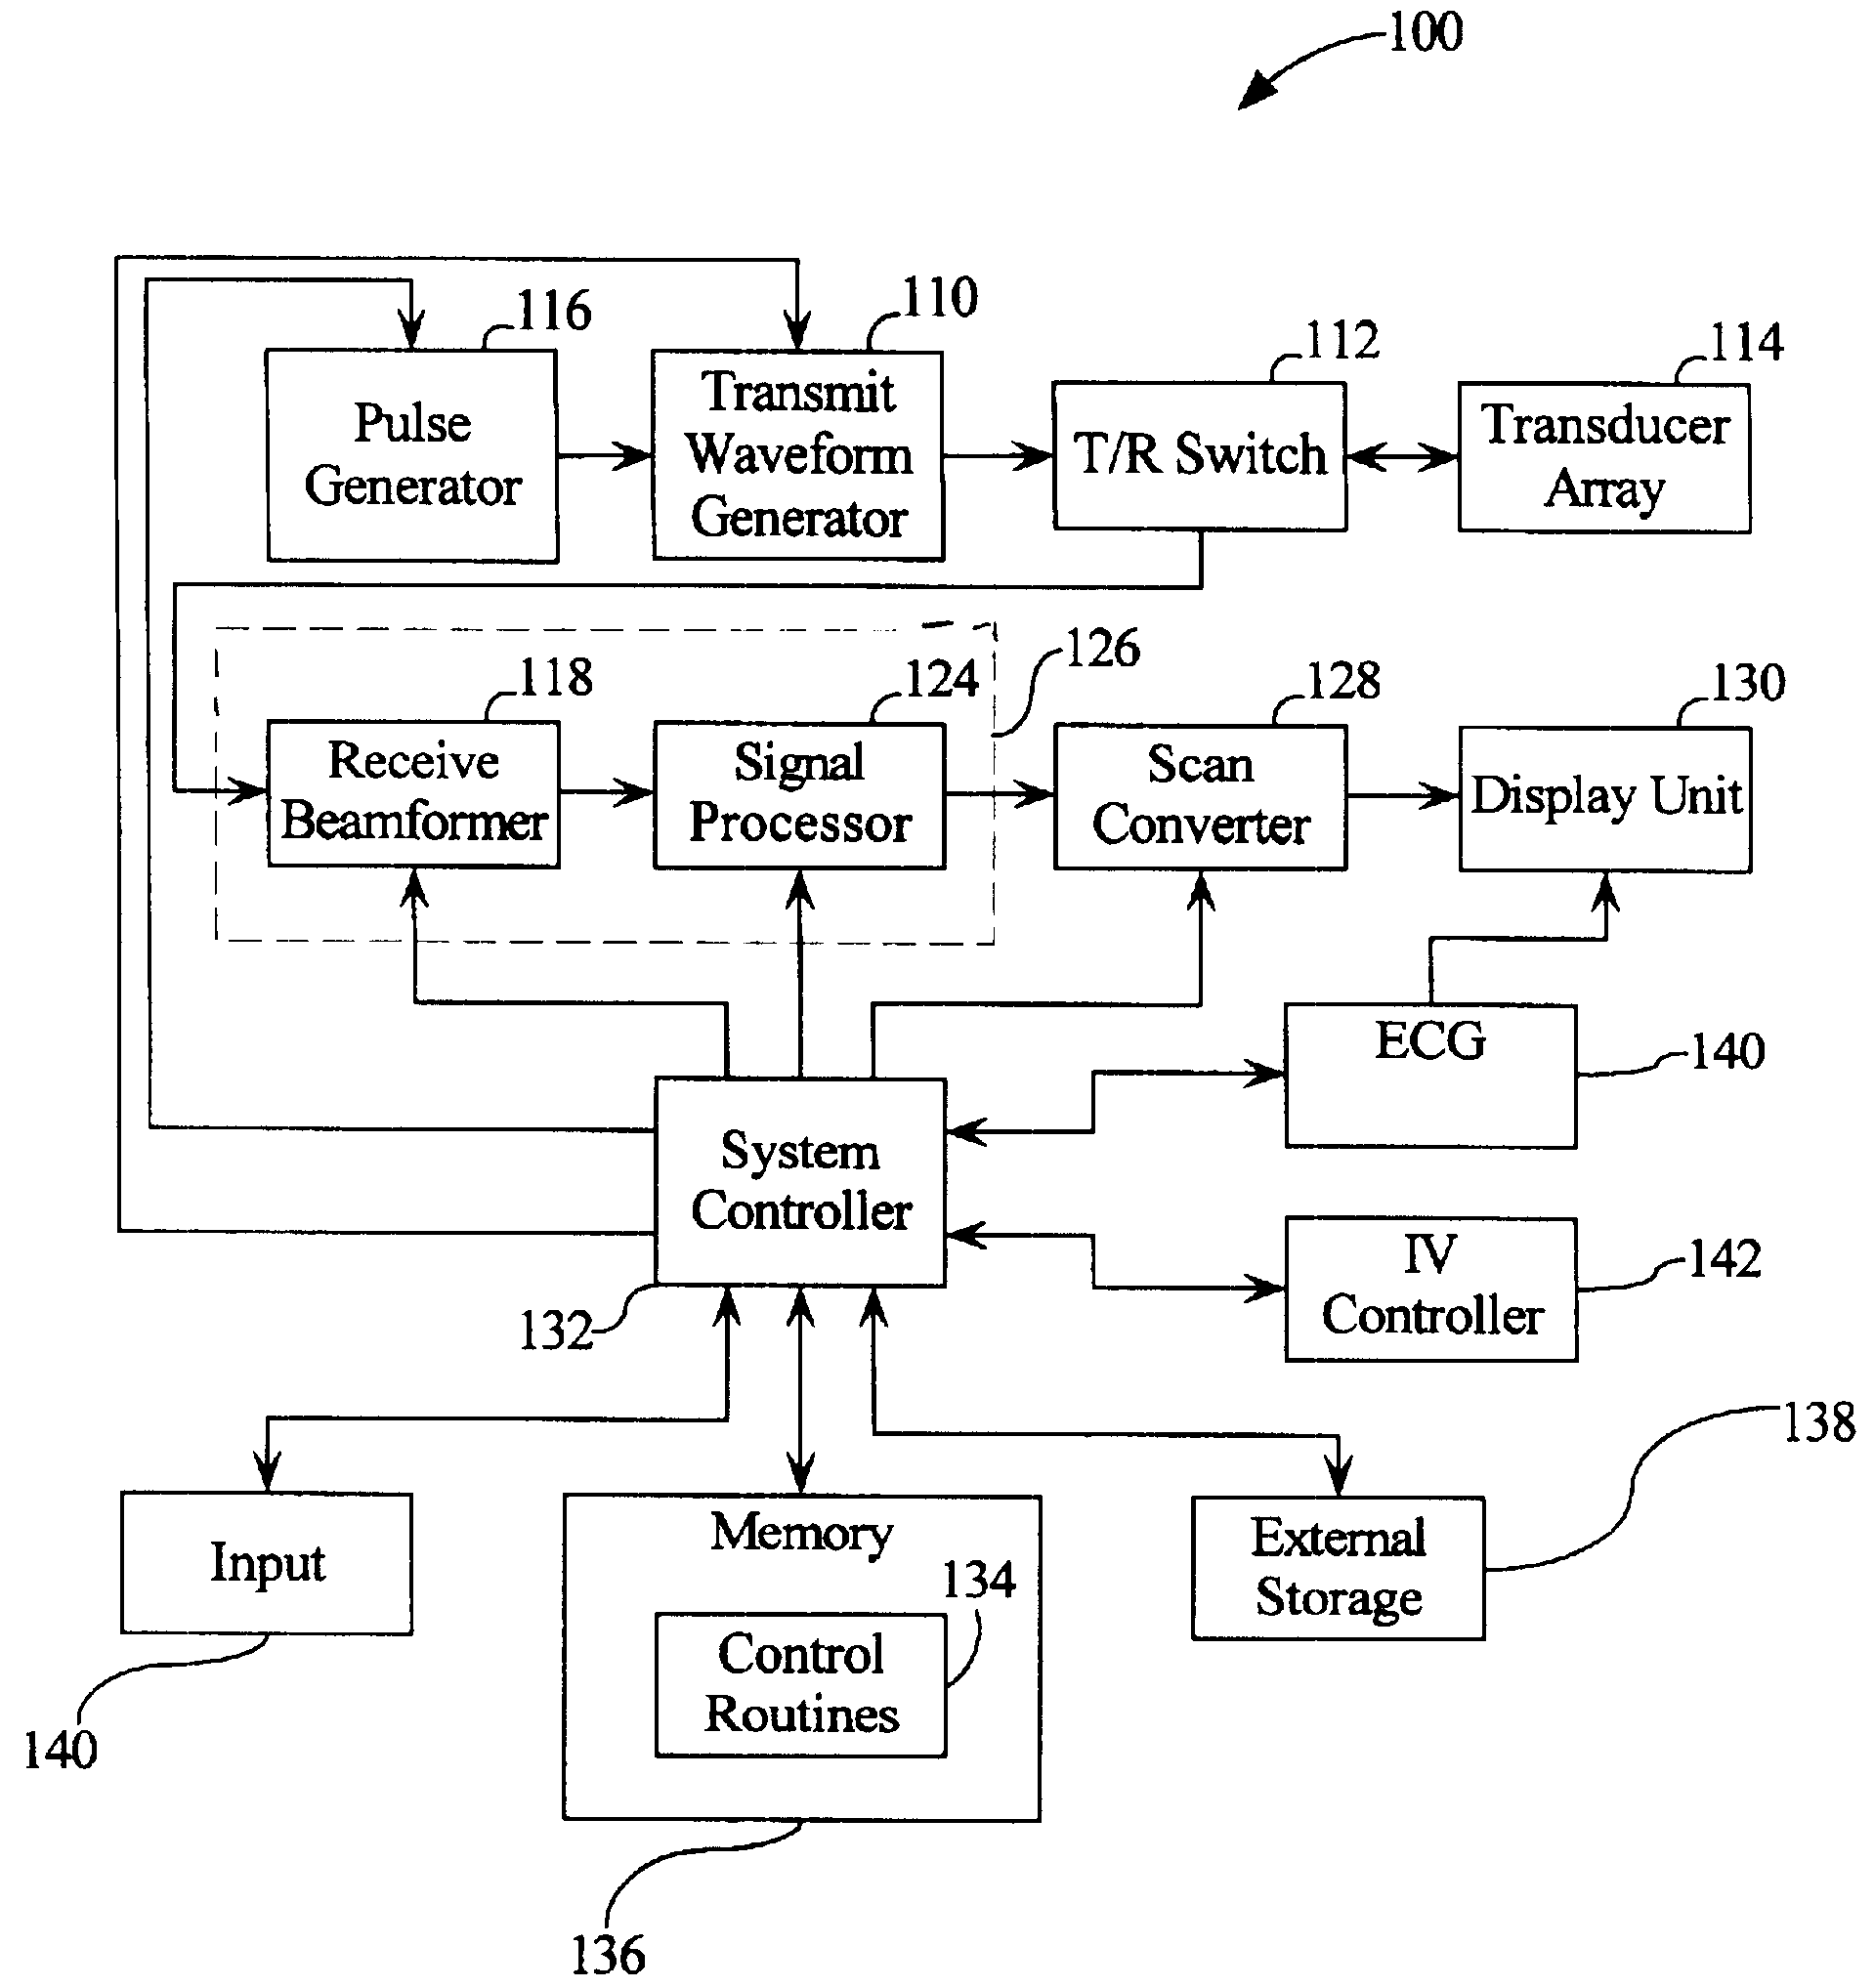 Automated ultrasound system for performing imaging studies utilizing ultrasound contrast agents